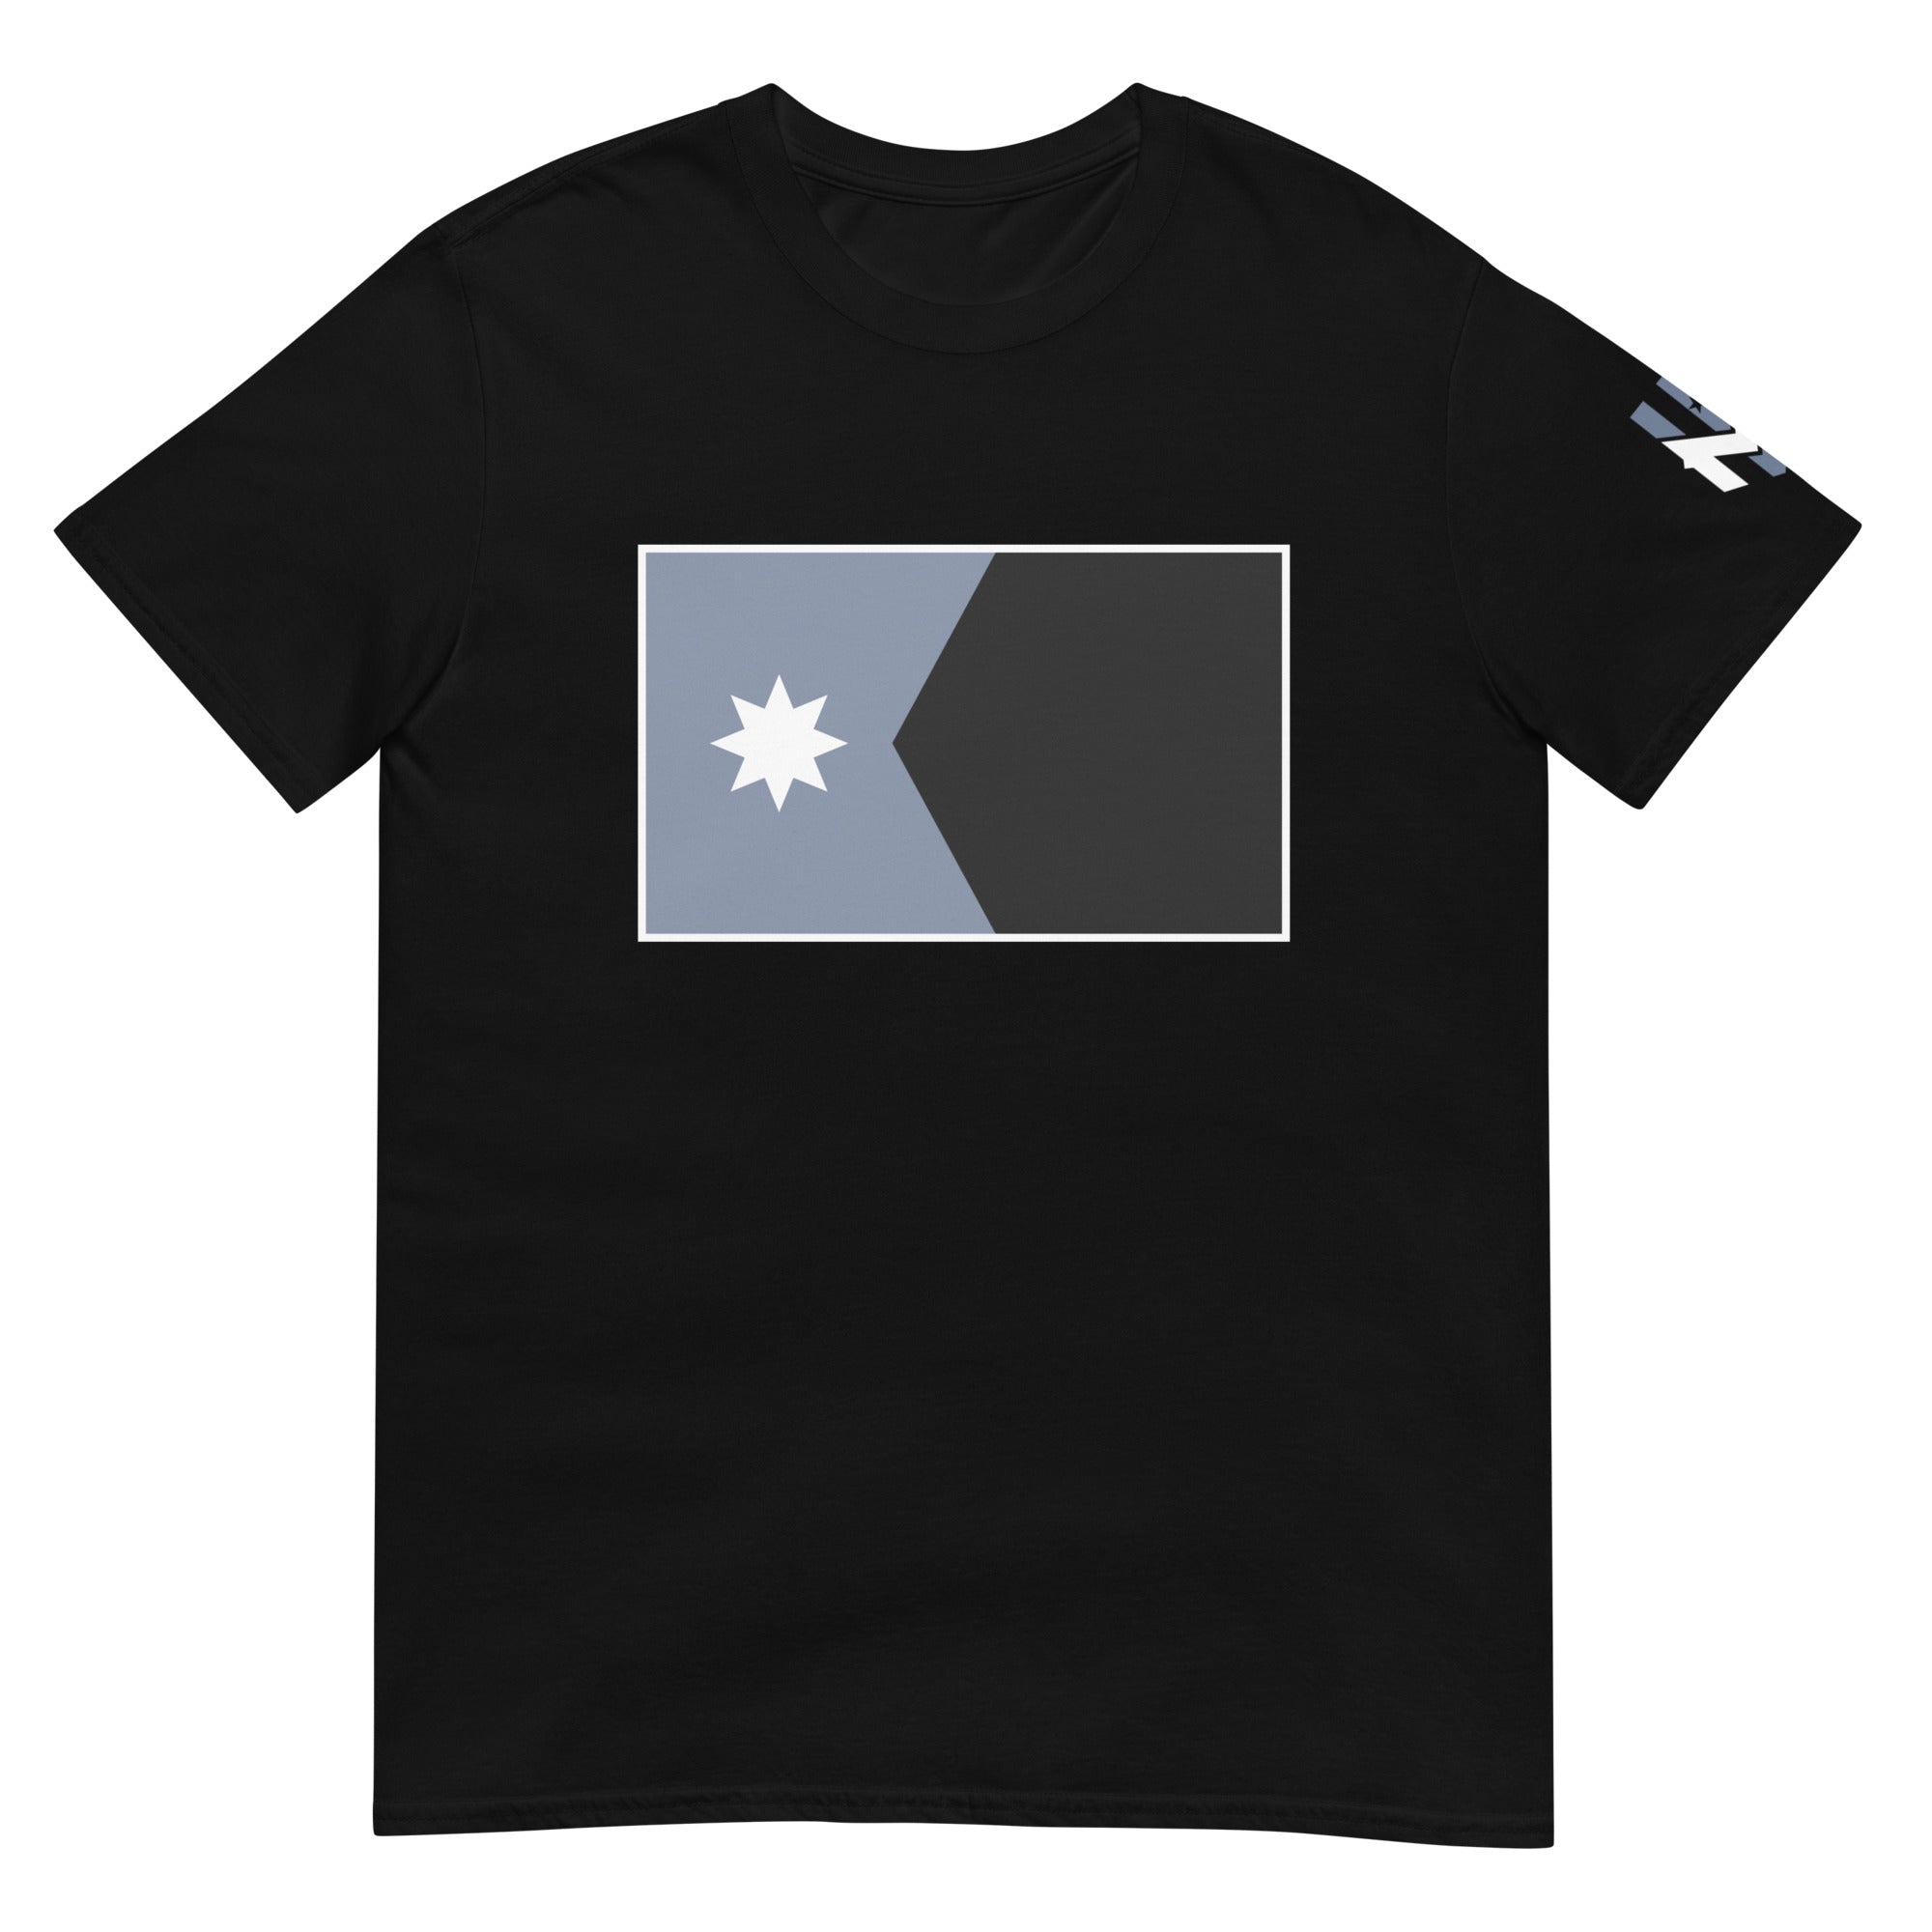 Wind Chill Dark "Our State" T-Shirt